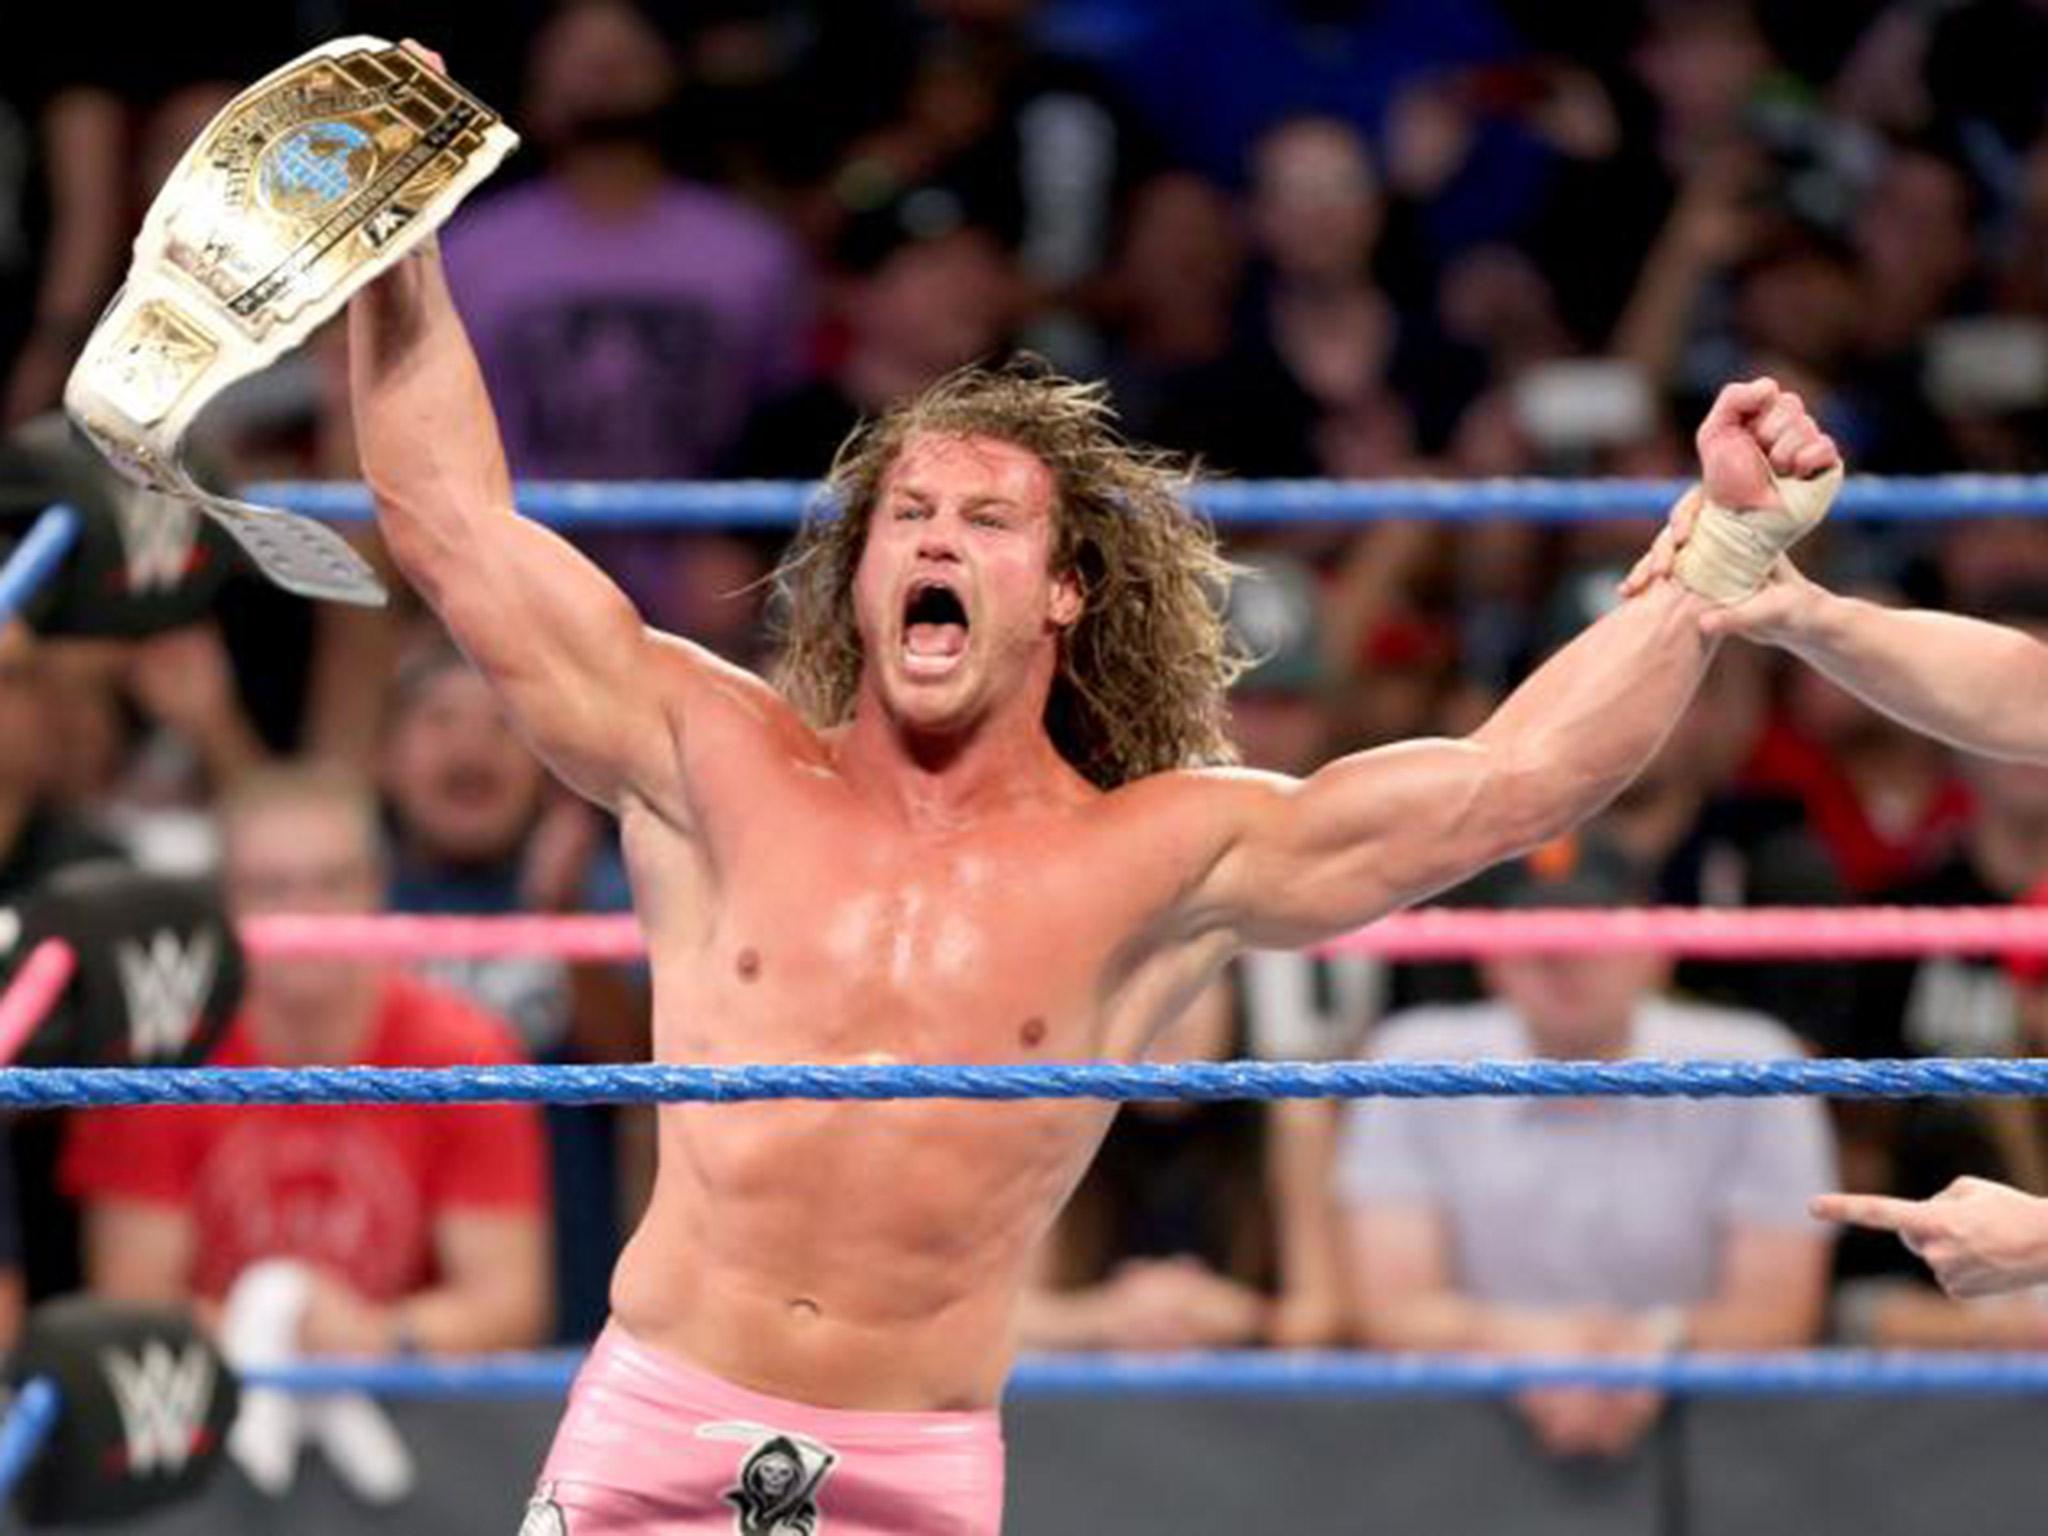 &#13;
Ziggler celebrates the title win that saved his career &#13;